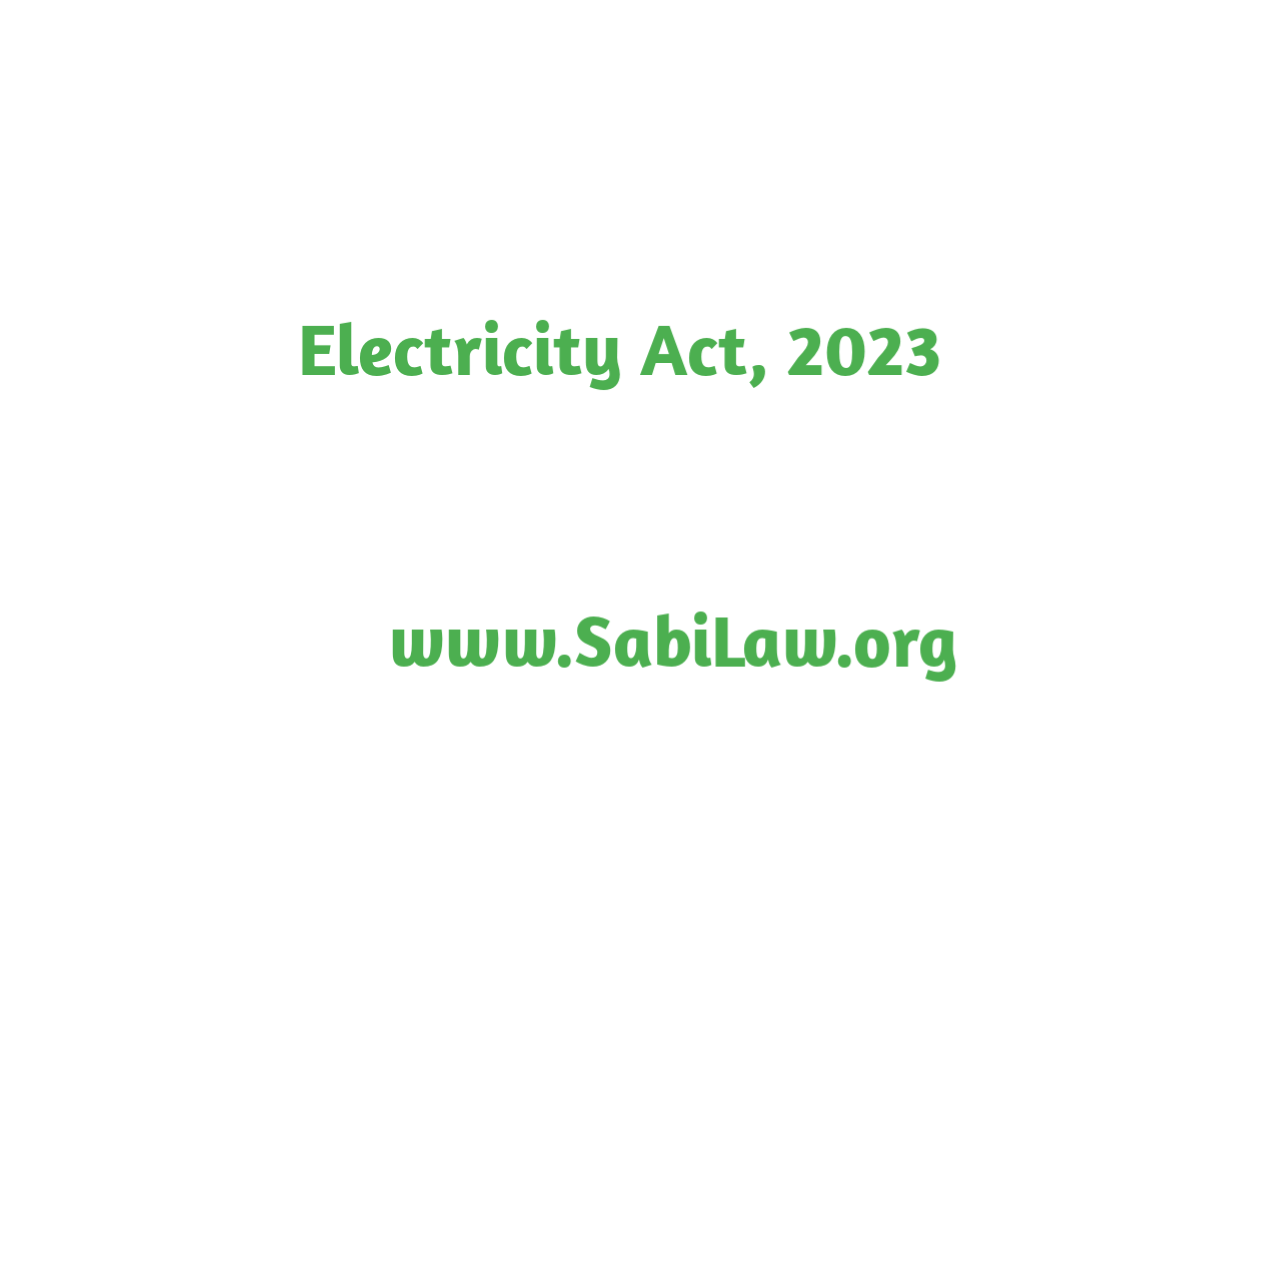 Copy of the Electricity Act, 2023